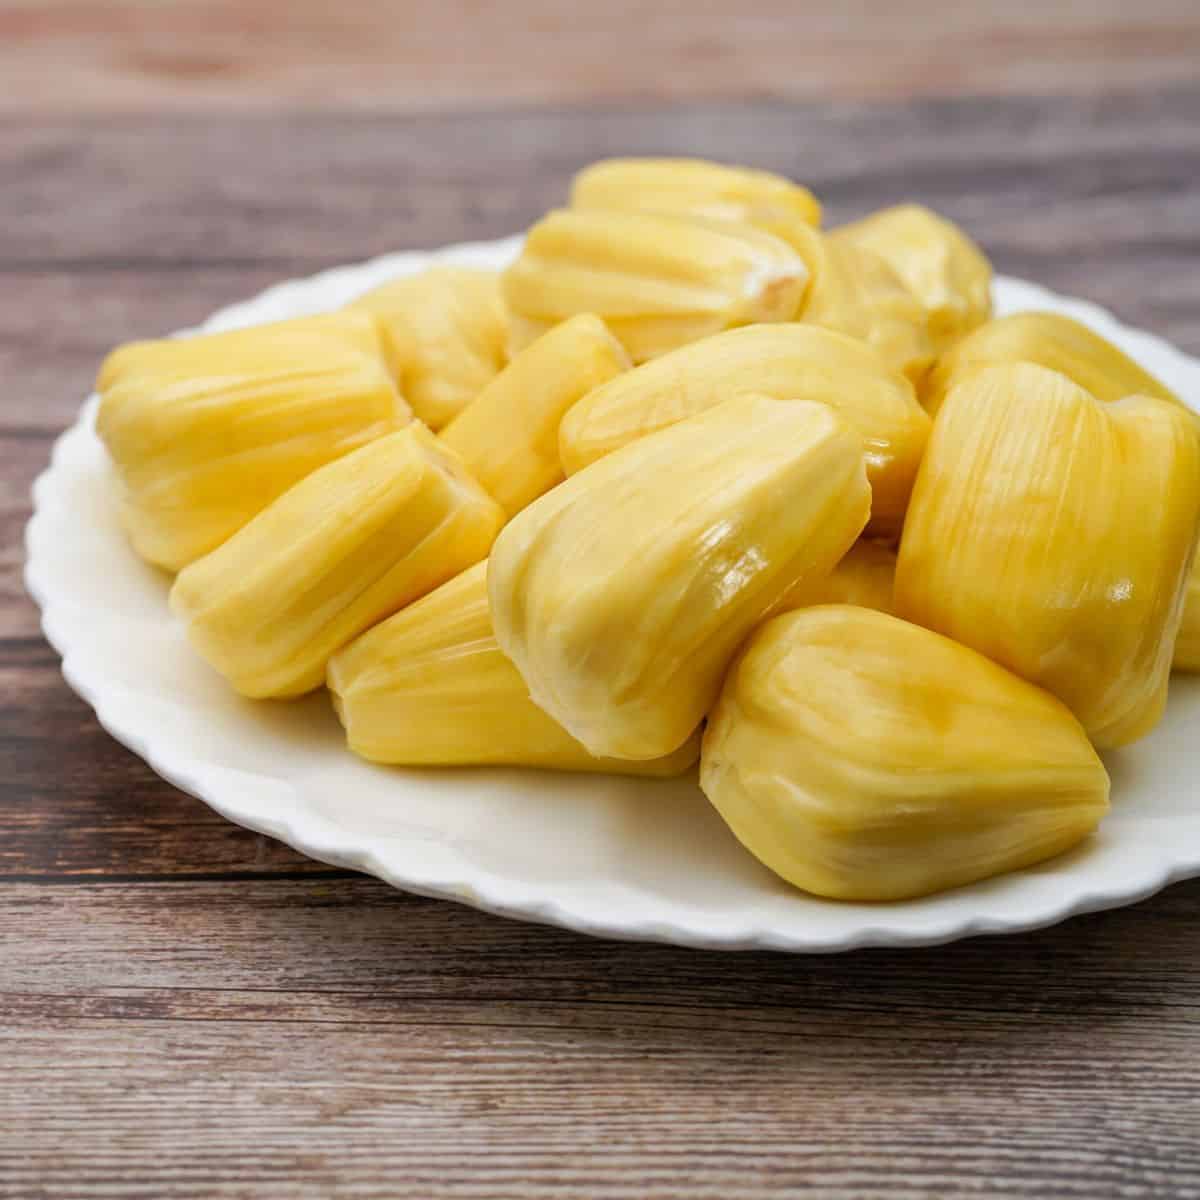 What Is Jackfruit and How to Prepare It?